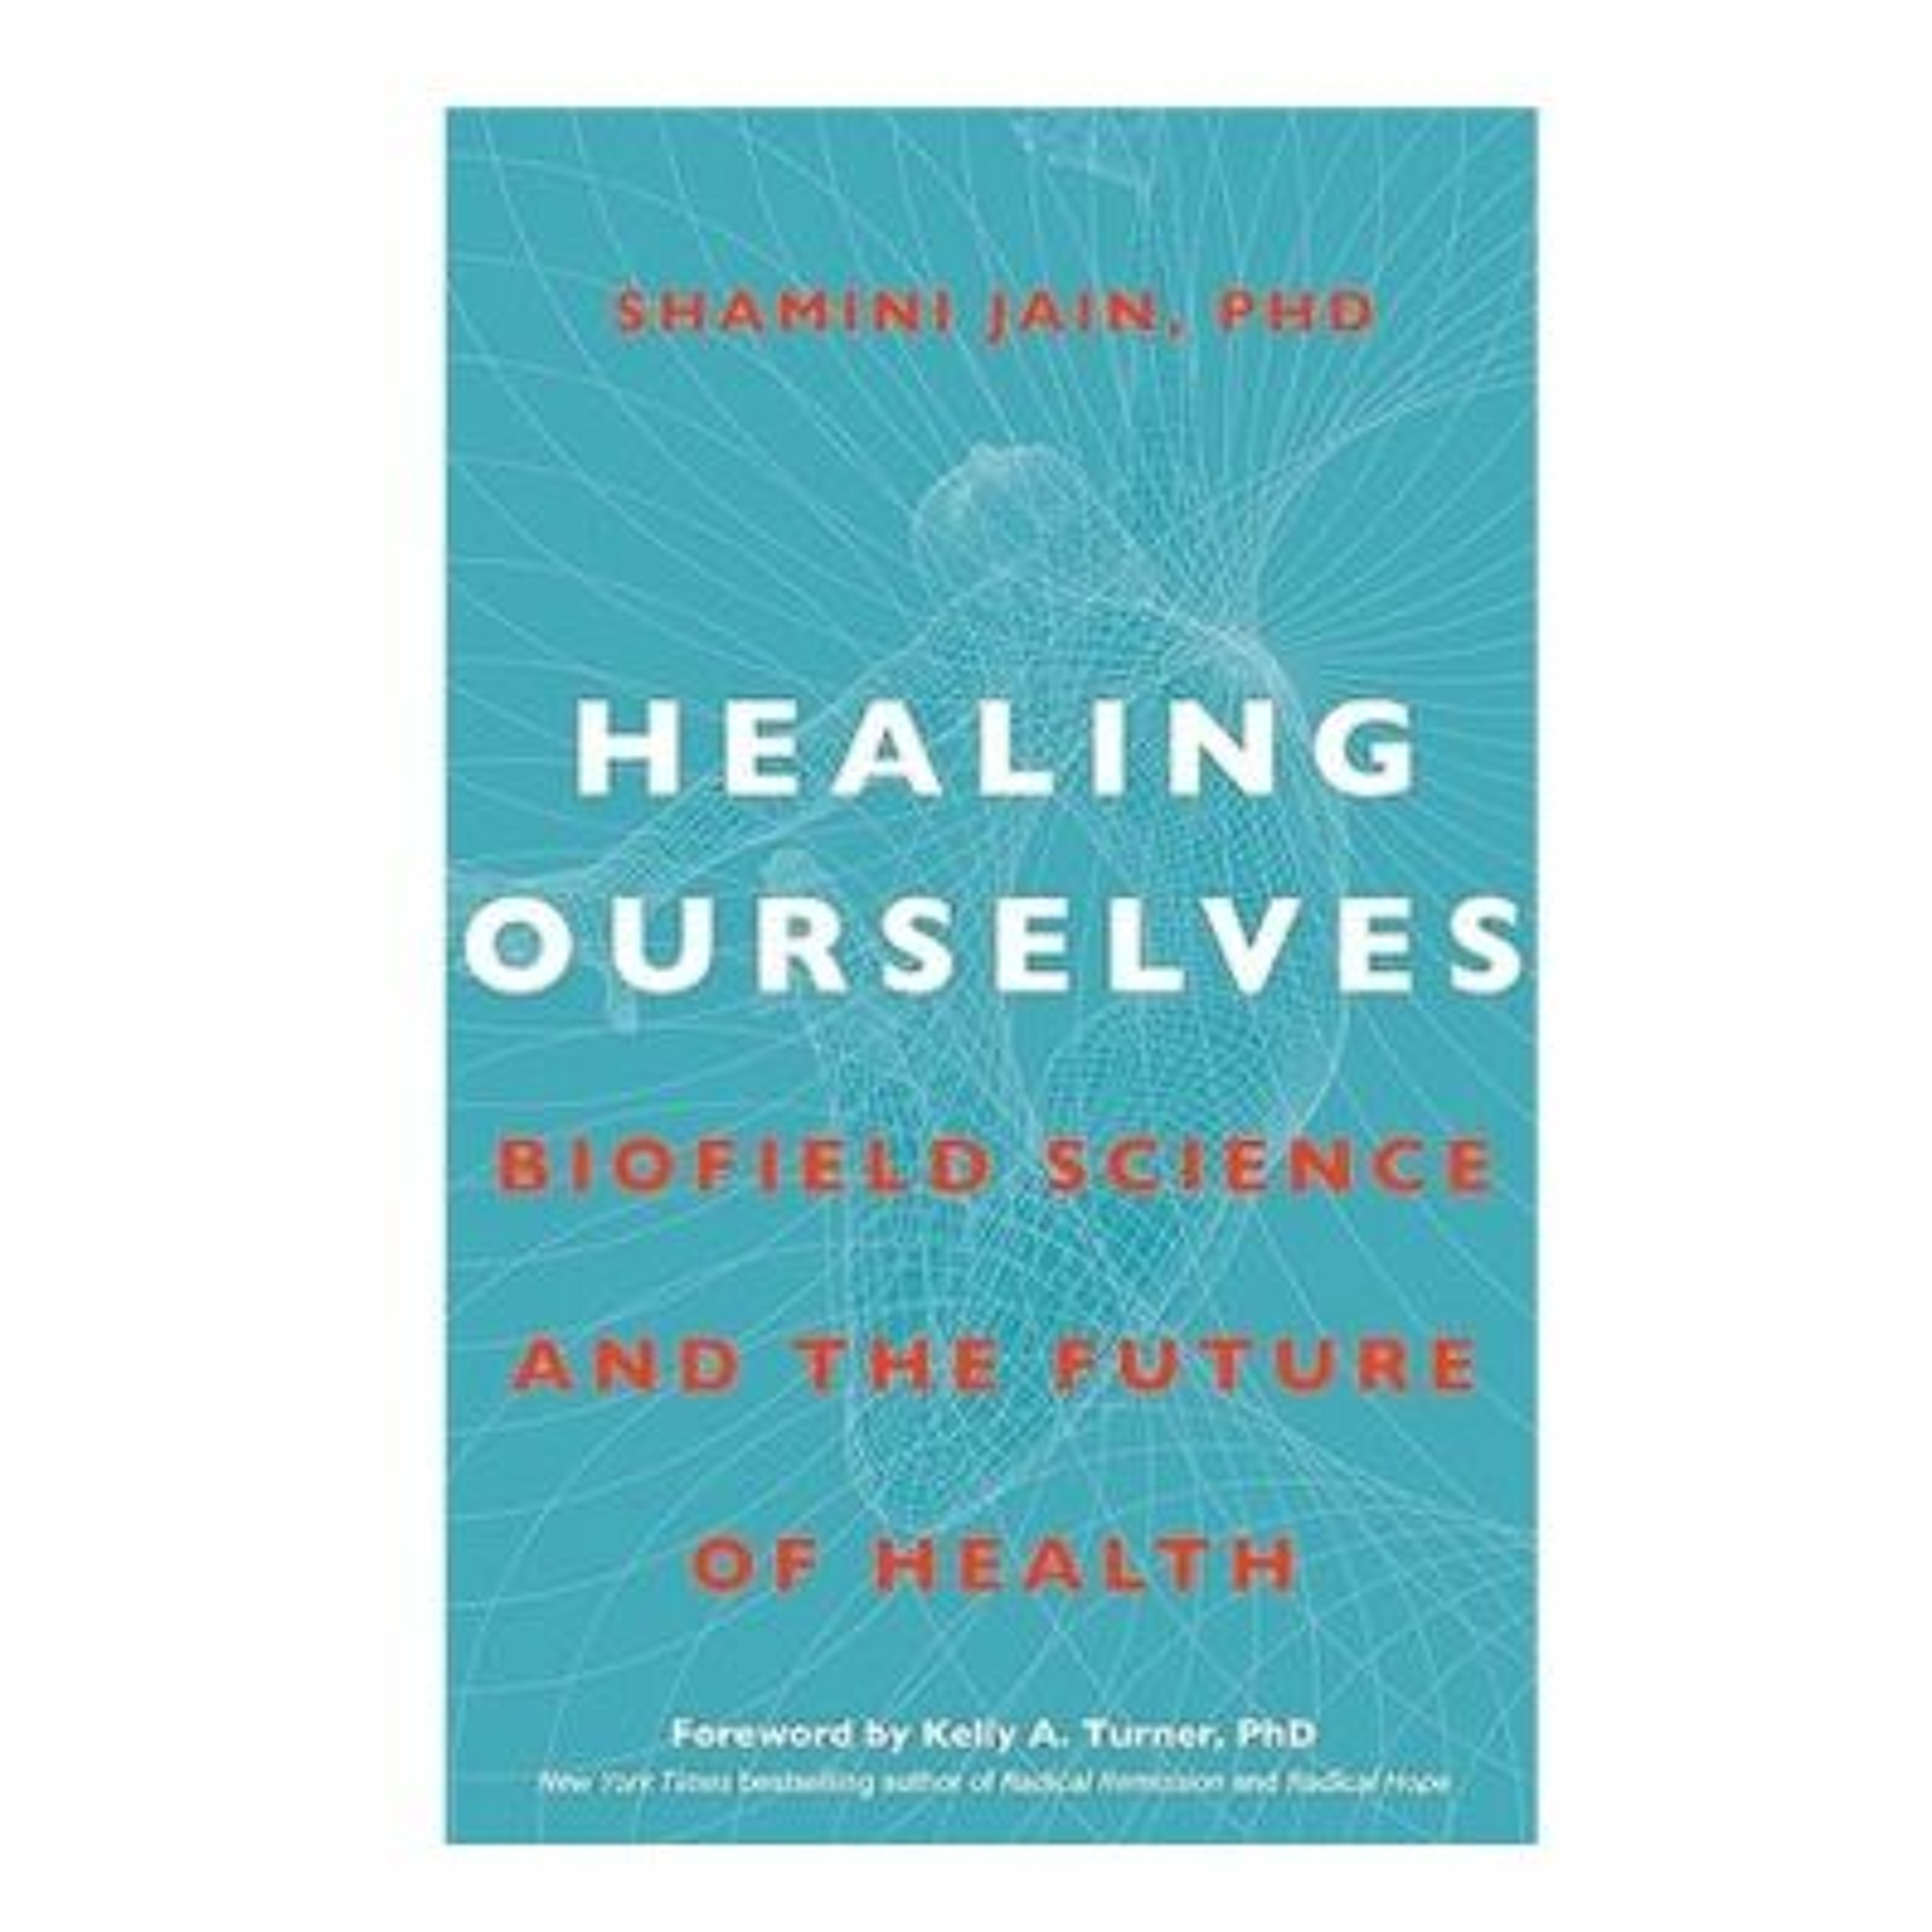 Podcast 1071: Healing Ourselves with Dr. Shamini Jain